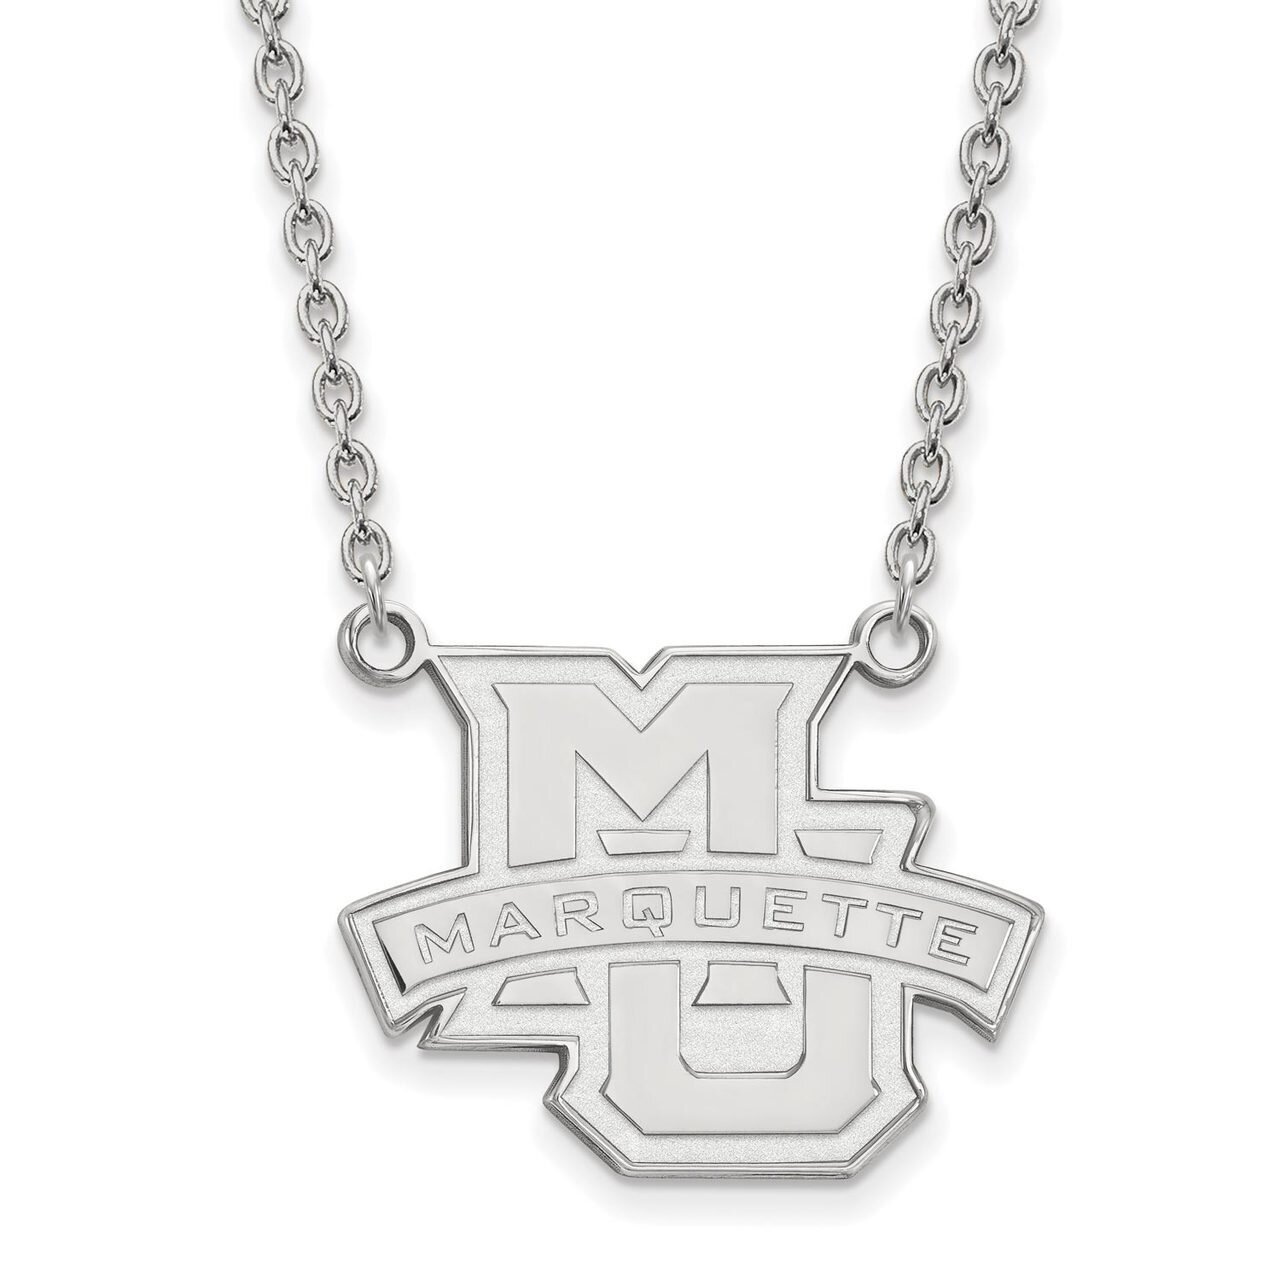 Marquette University Large Pendant with Chain Necklace 14k White Gold 4W008MAR-18